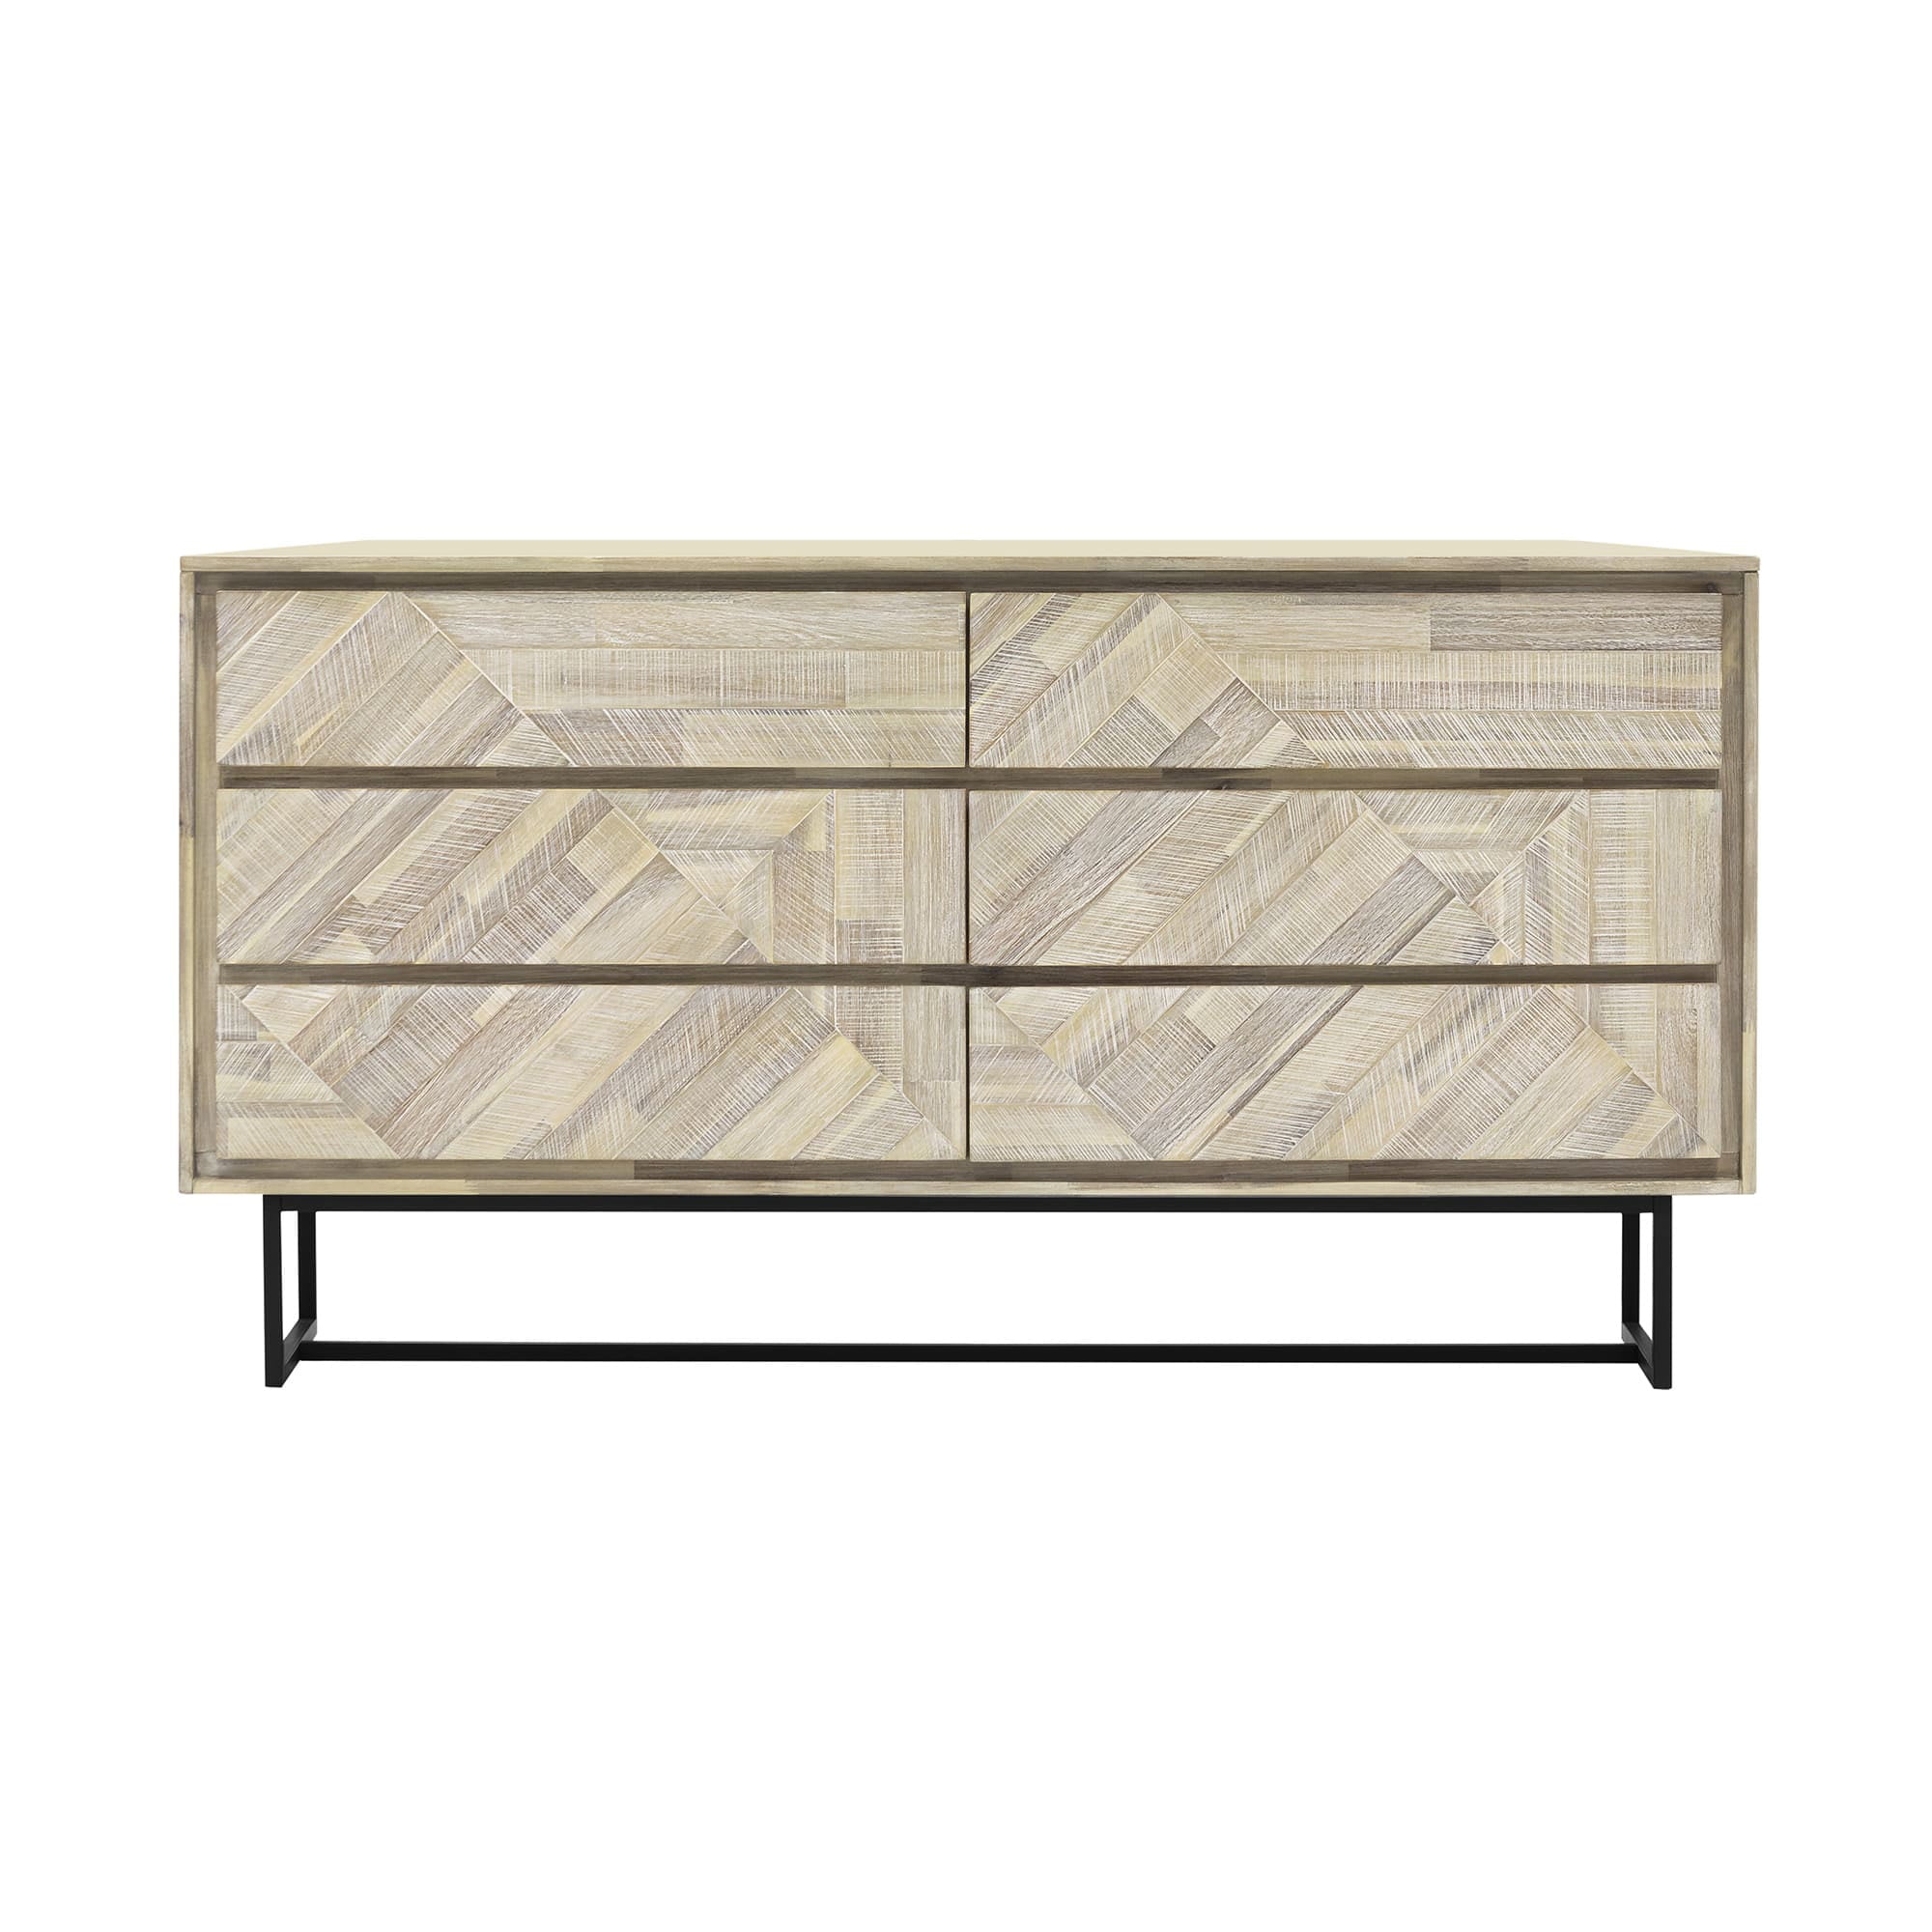 Picture of Armen Living LCPEDRNAT Peridot 6 Drawer Dresser in Natural Acacia Wood